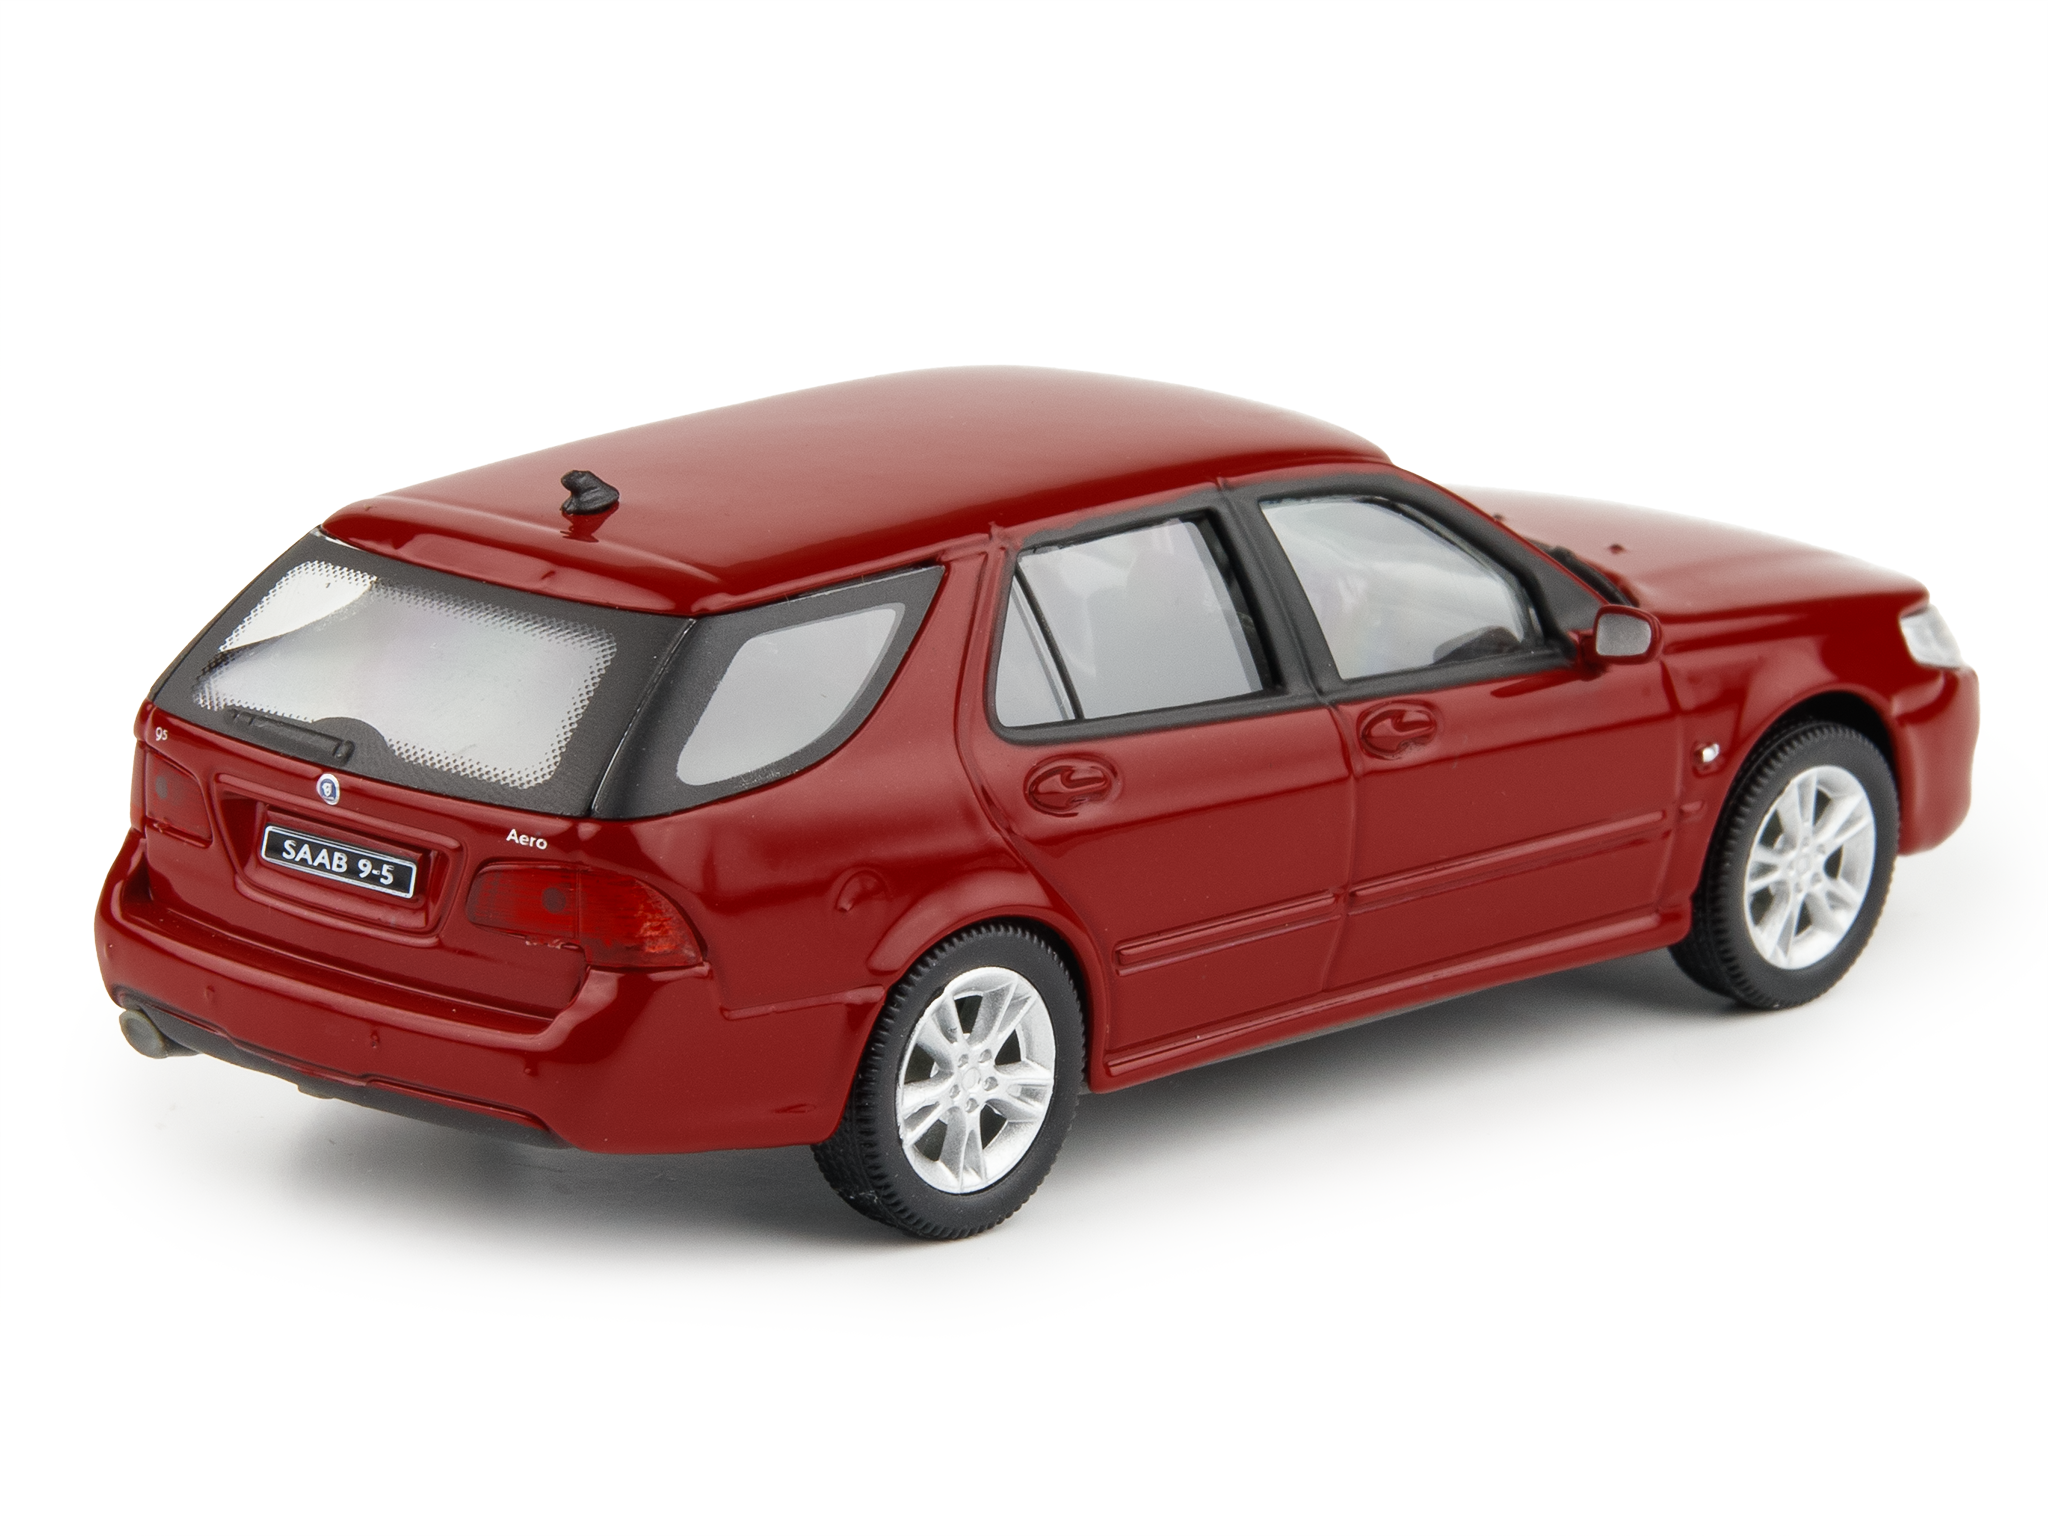 Saab 9.5 Estate 1998 red- 1:43 Scale